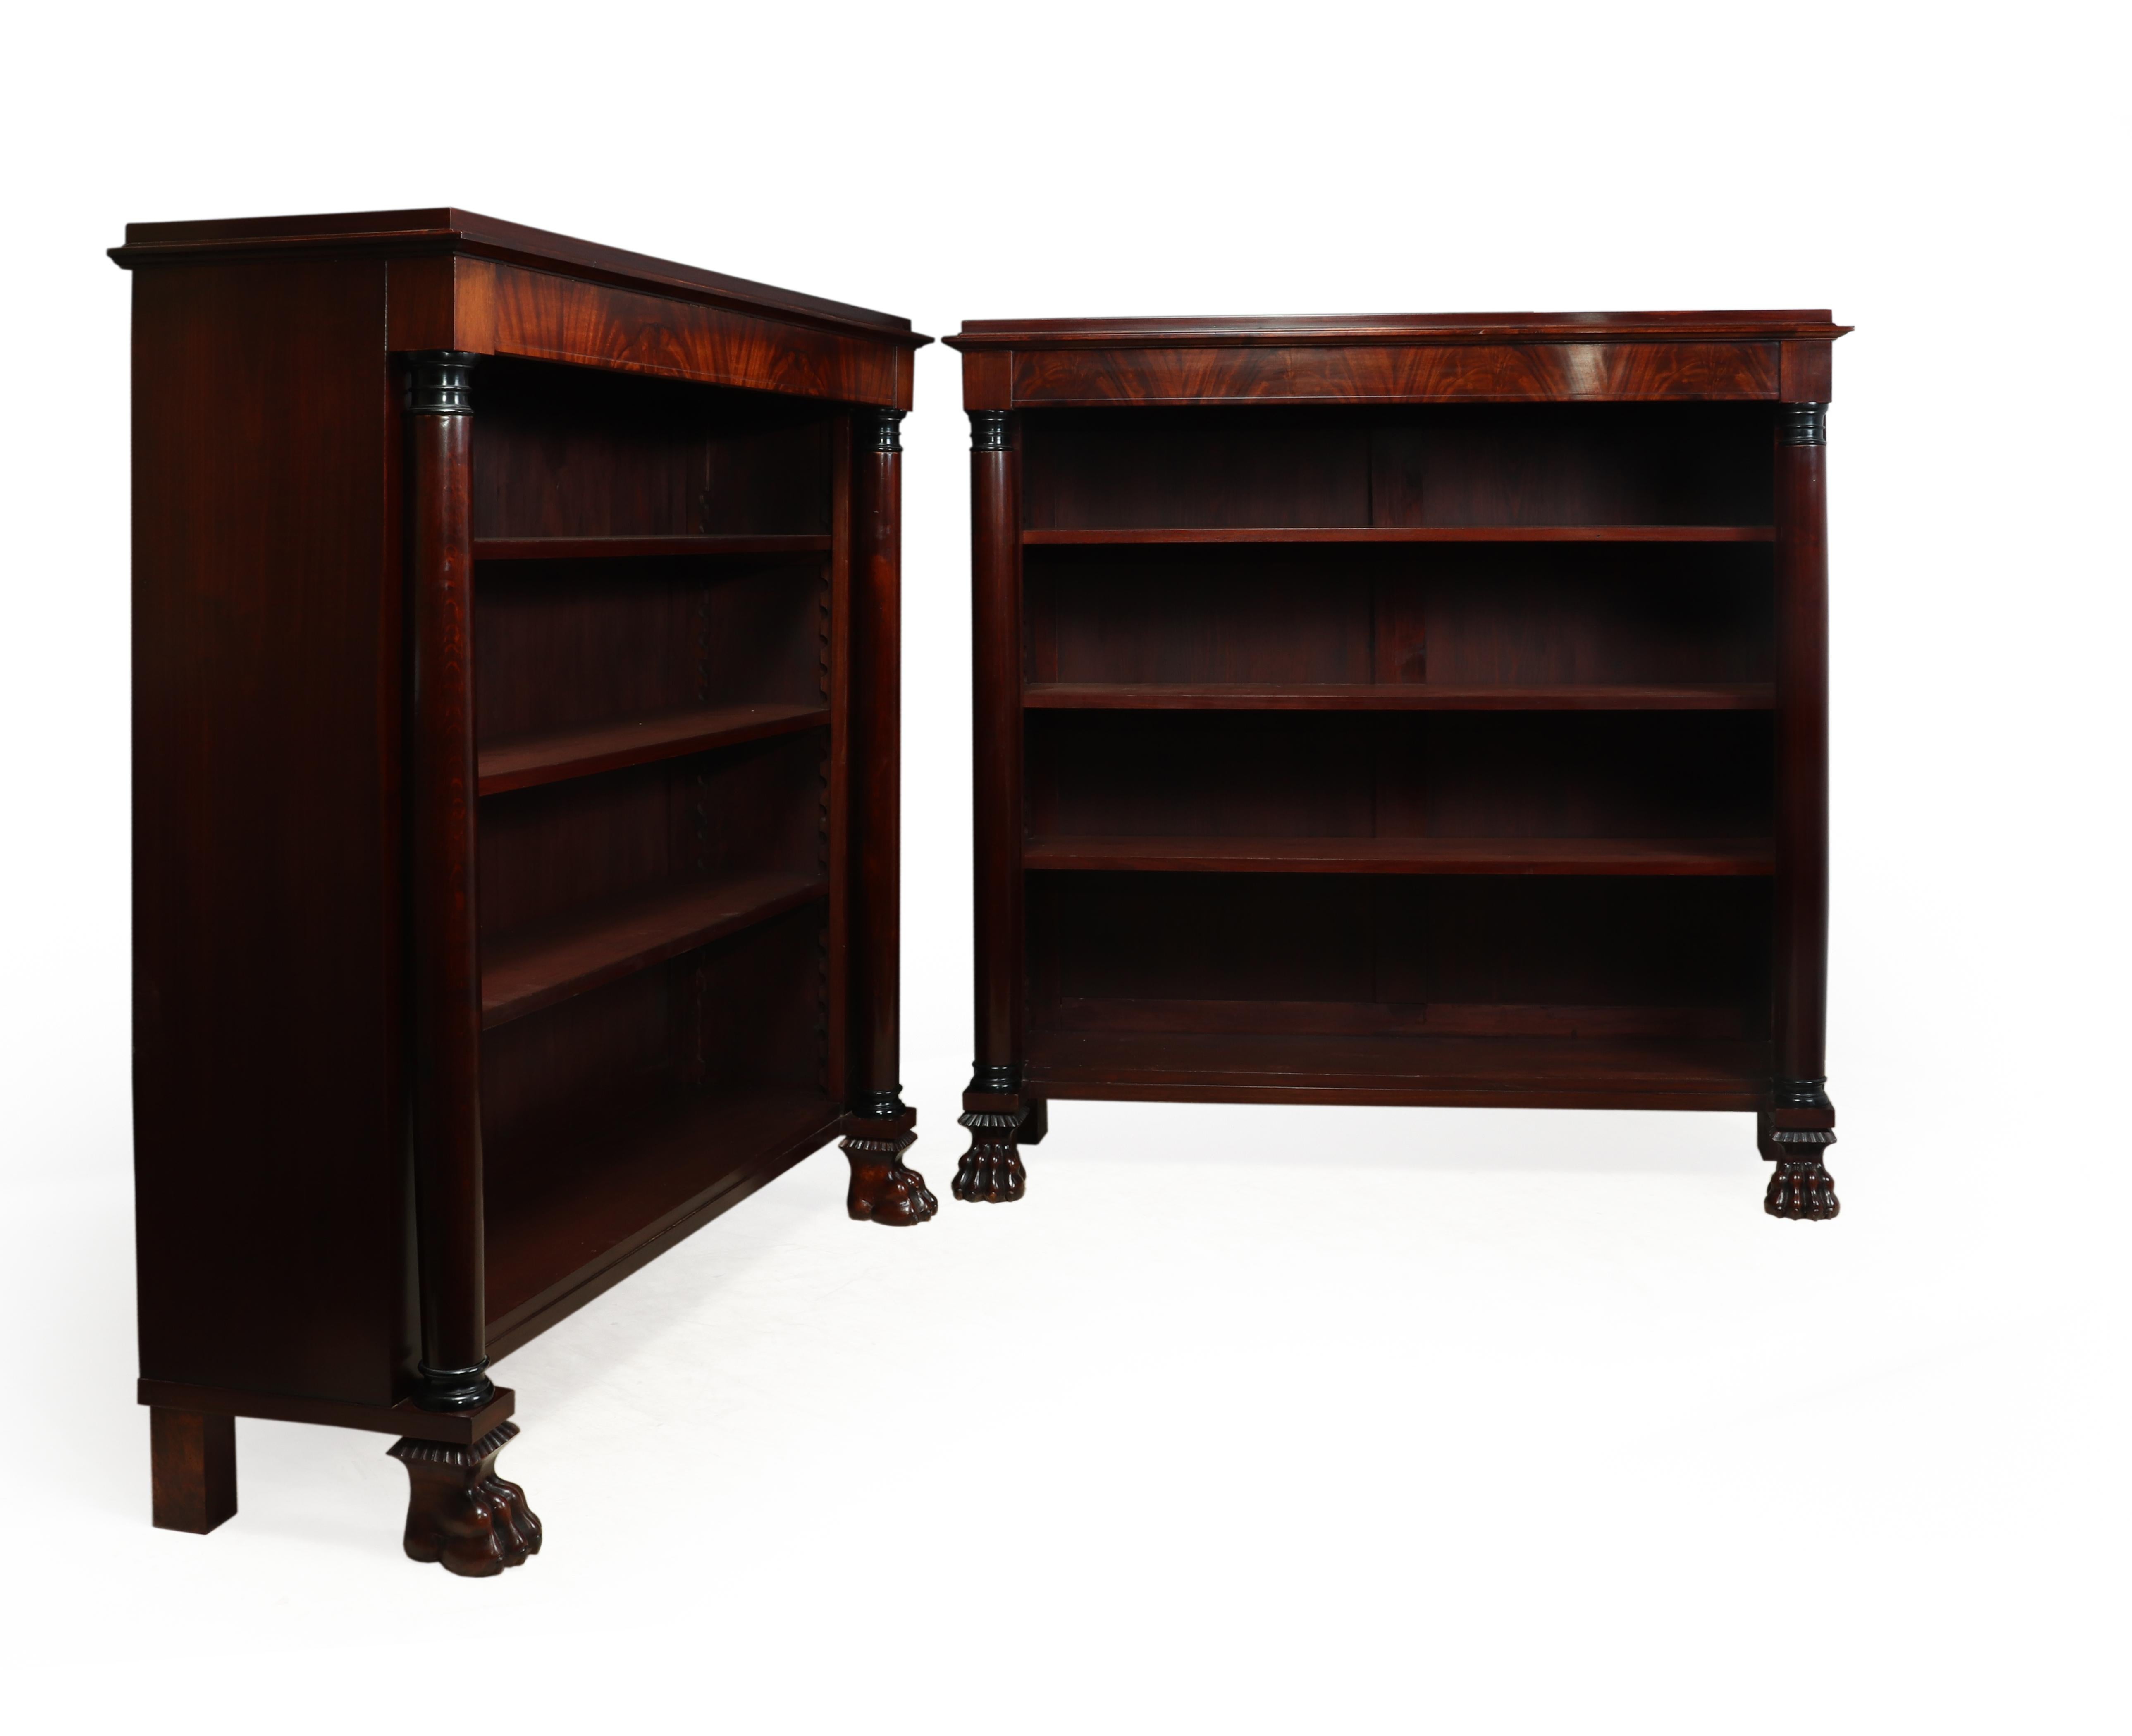 Pair of French Empire mahogany open bookcases, circa 1880

A pair of important French empire style mahogany open bookcases the rectangular tops are supported by turned columns with ebony capitals, each bookcase has three adjustable shelves. This